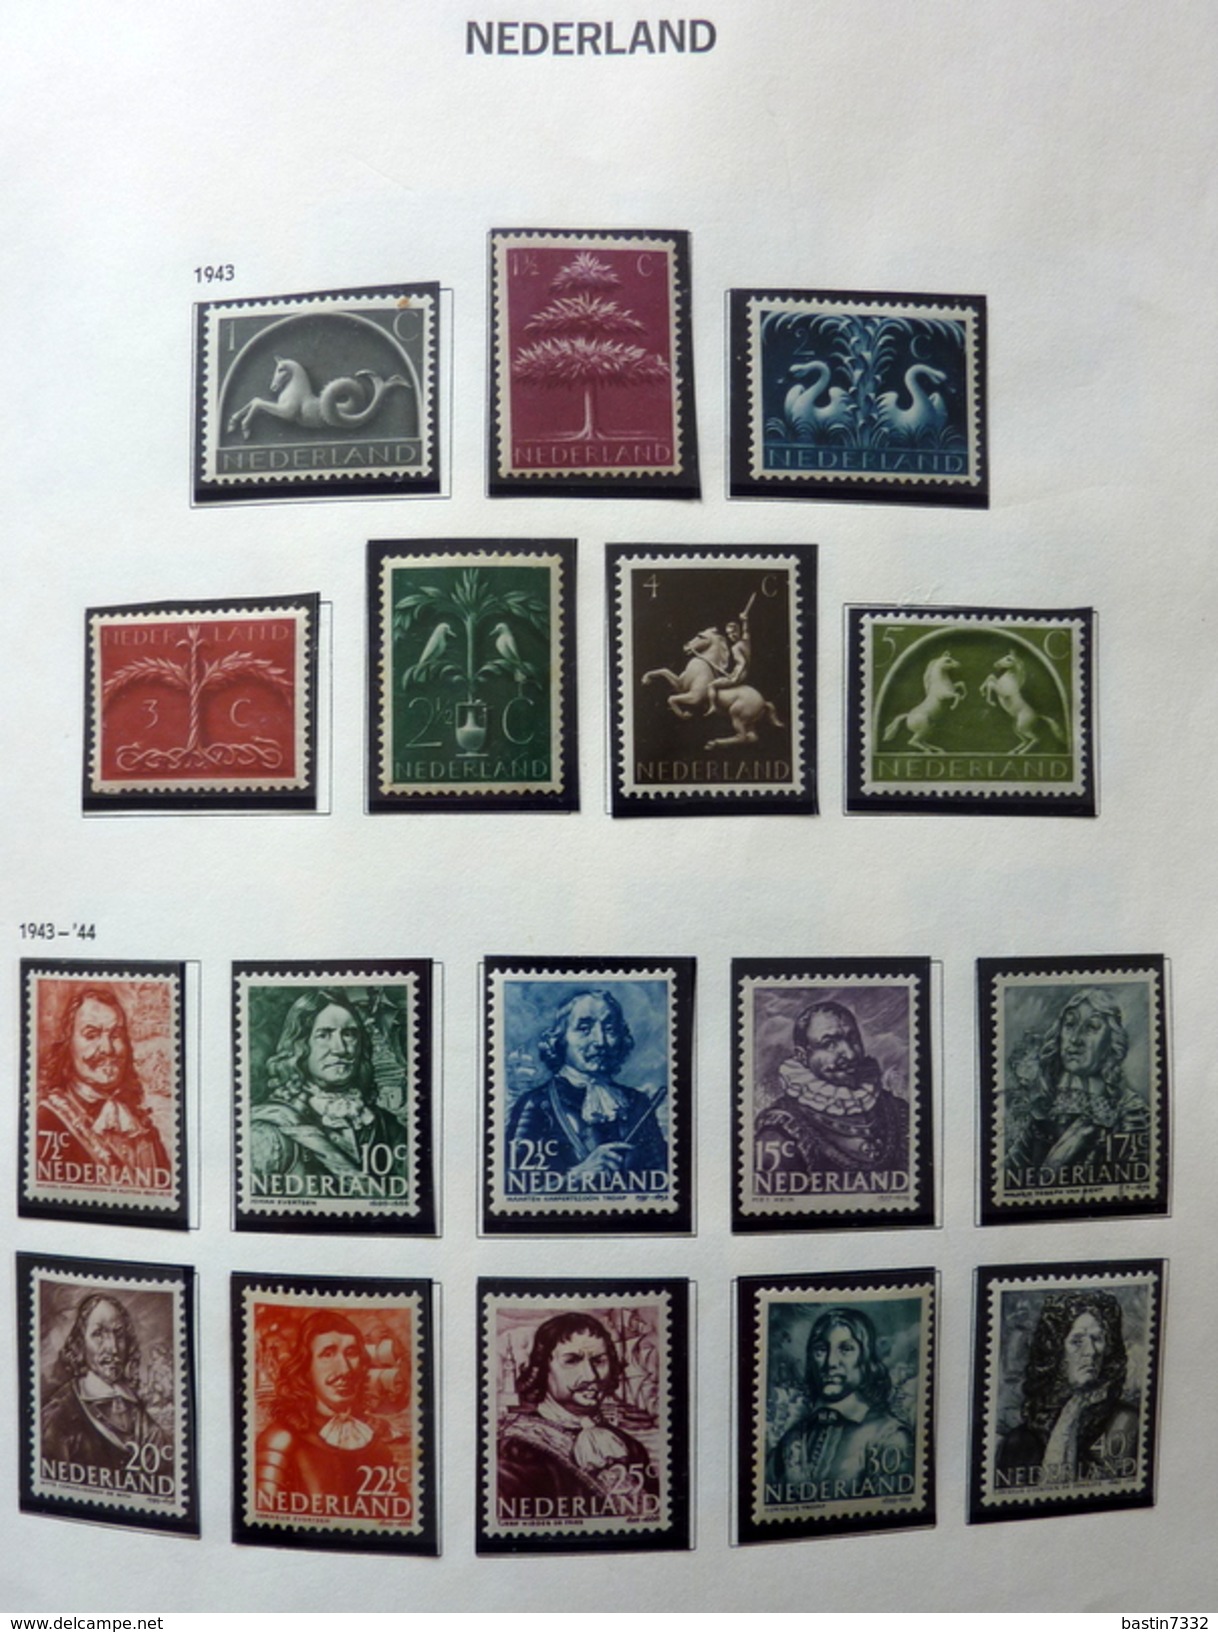 Netherlands/Pays-Bas/Olanda collection in 2 Davo binders